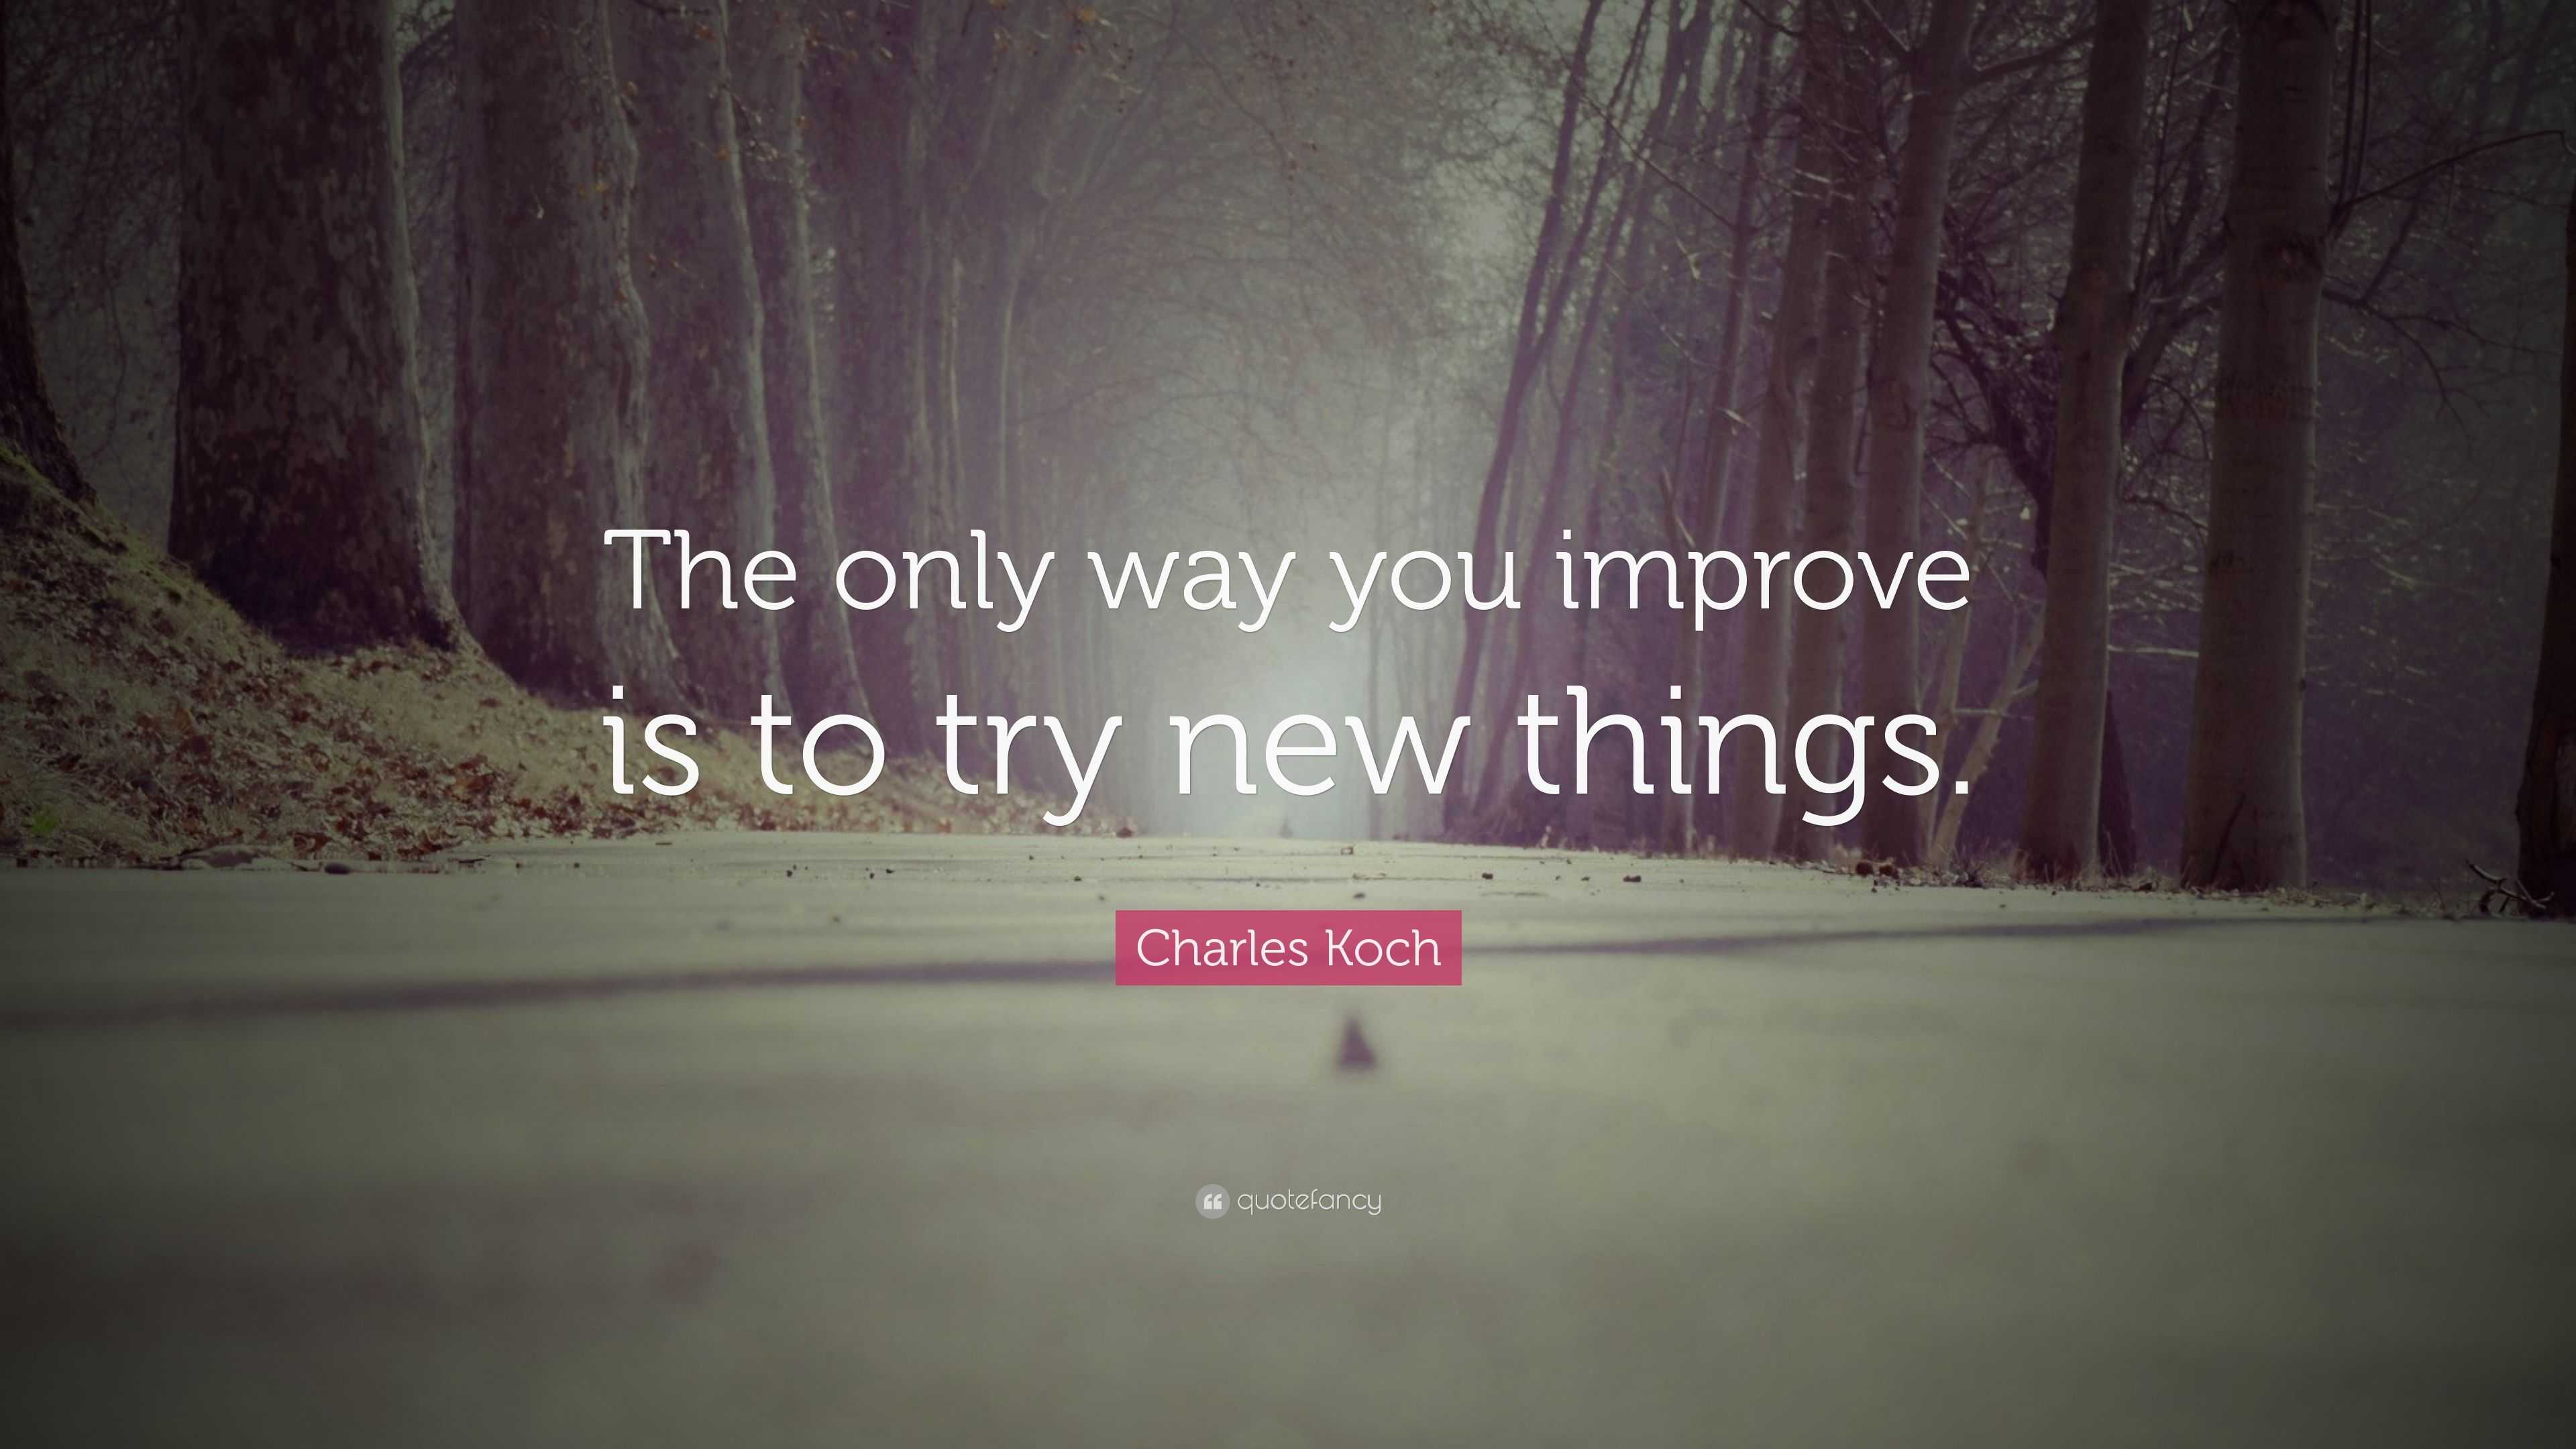 Charles Koch Quote: “The only way you improve is to try new things.”